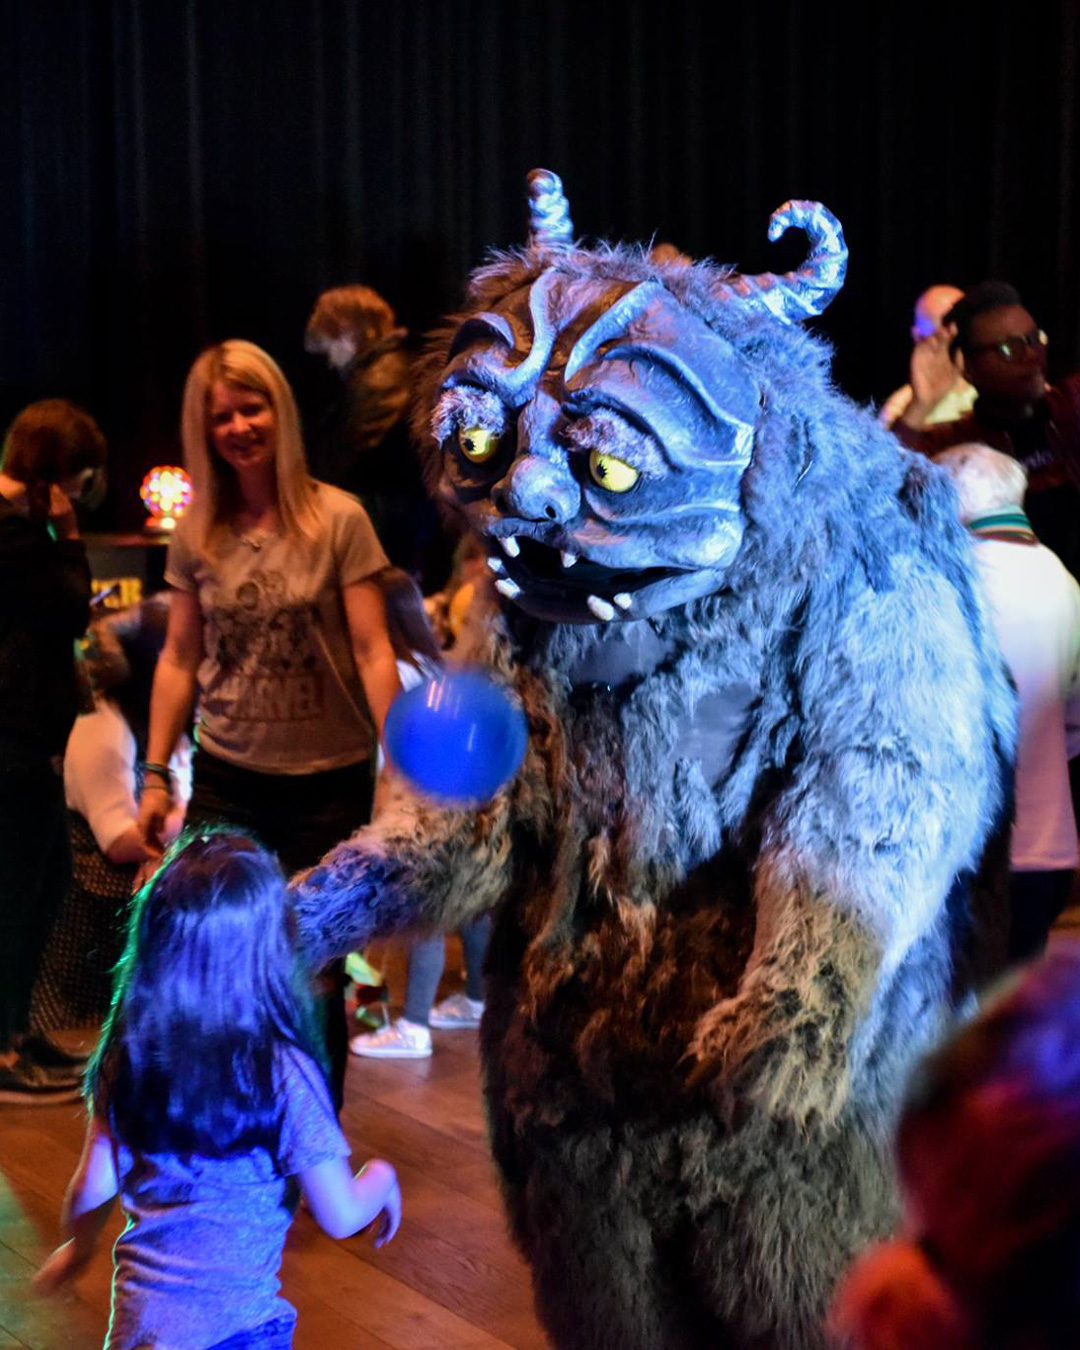 A child dancing with an adult in a monster costume